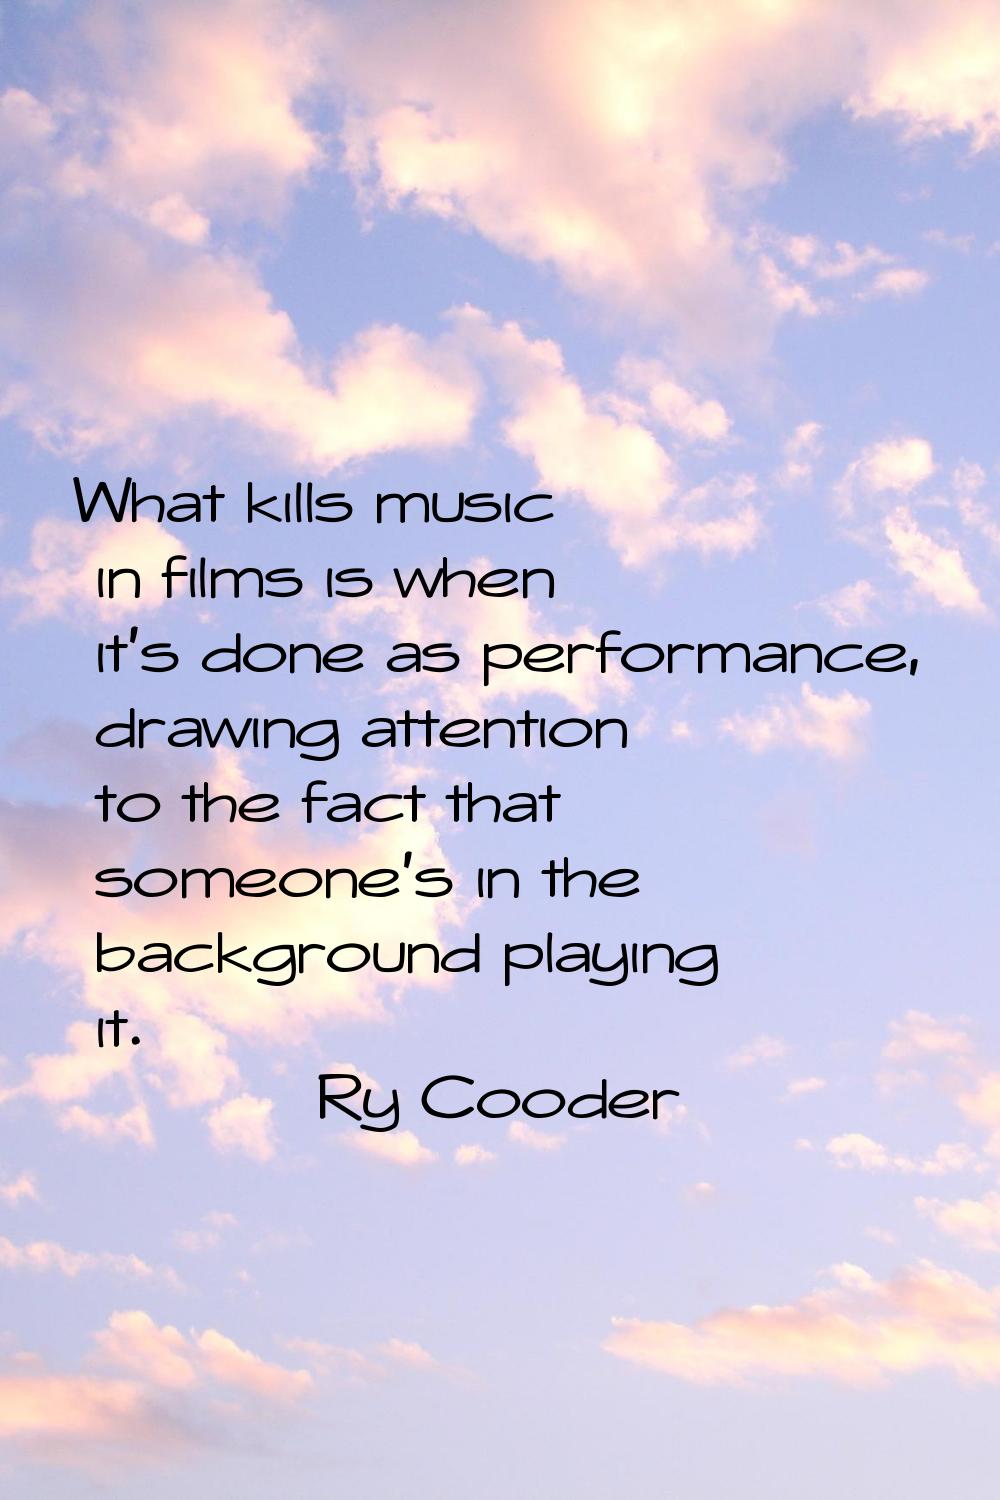 What kills music in films is when it's done as performance, drawing attention to the fact that some